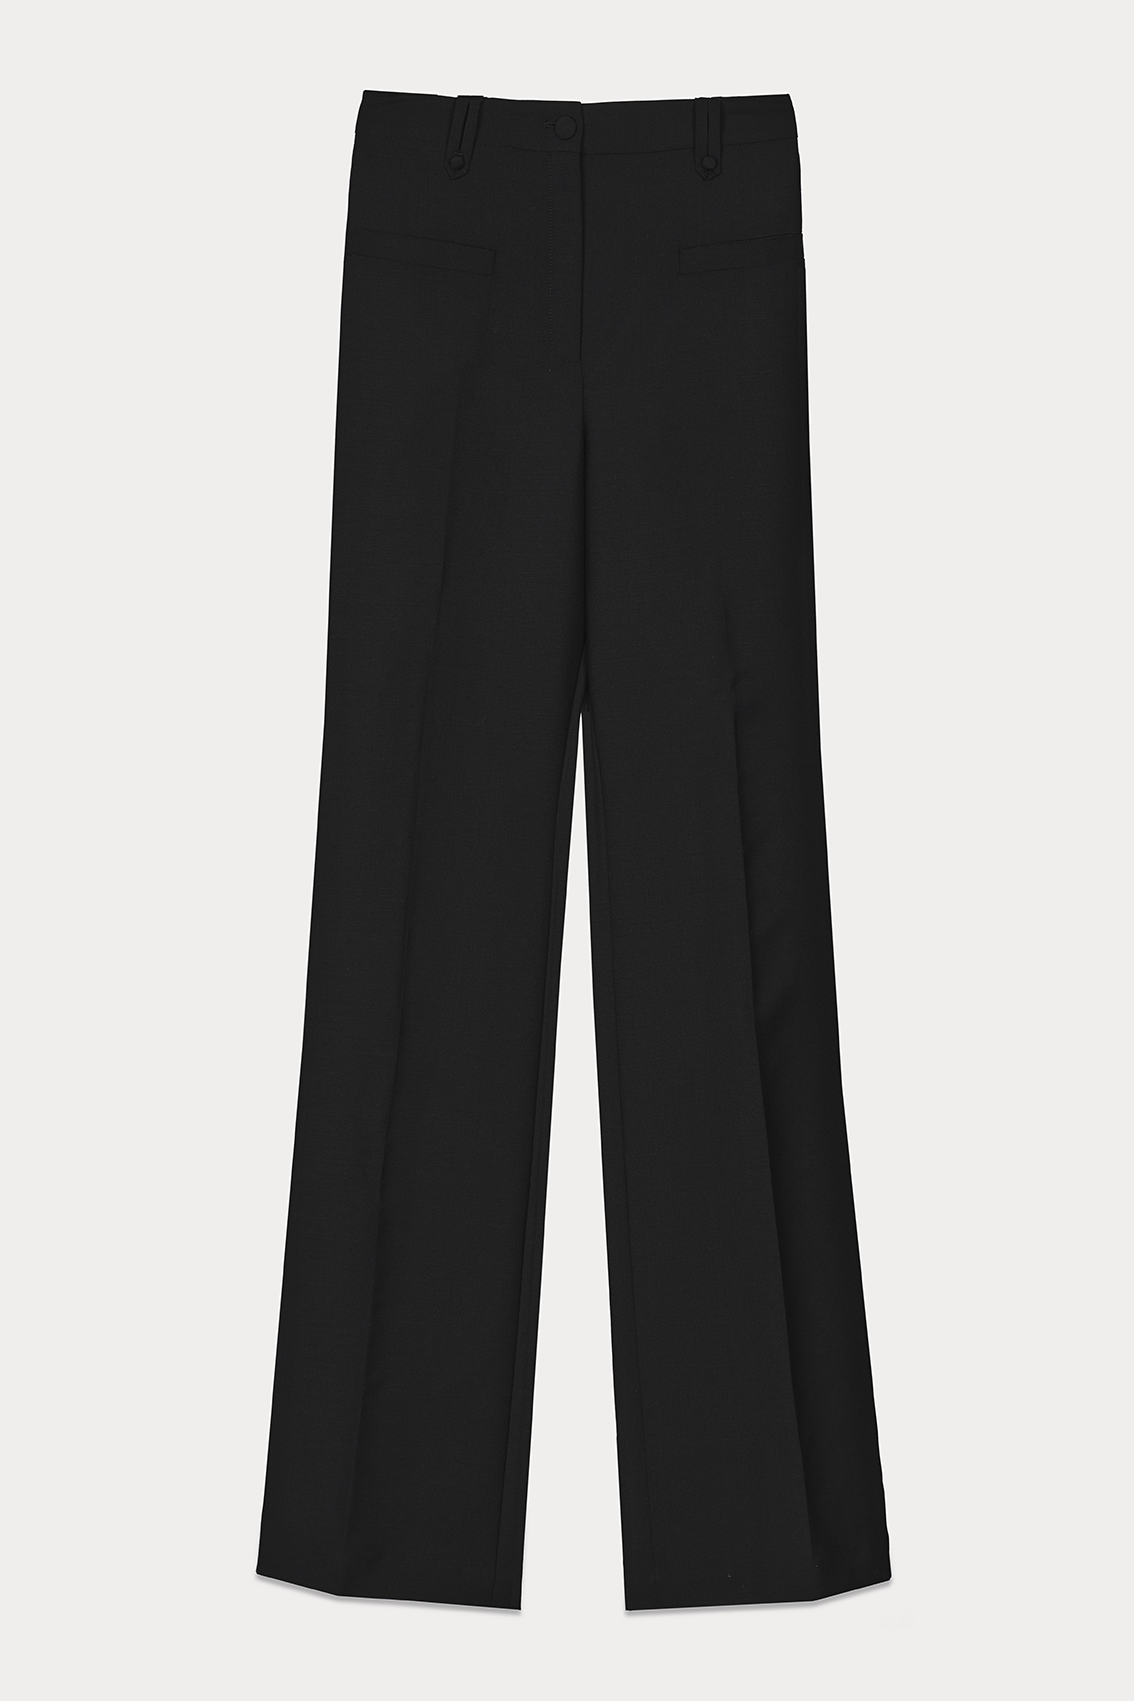 Front Seam Lengthening Trousers